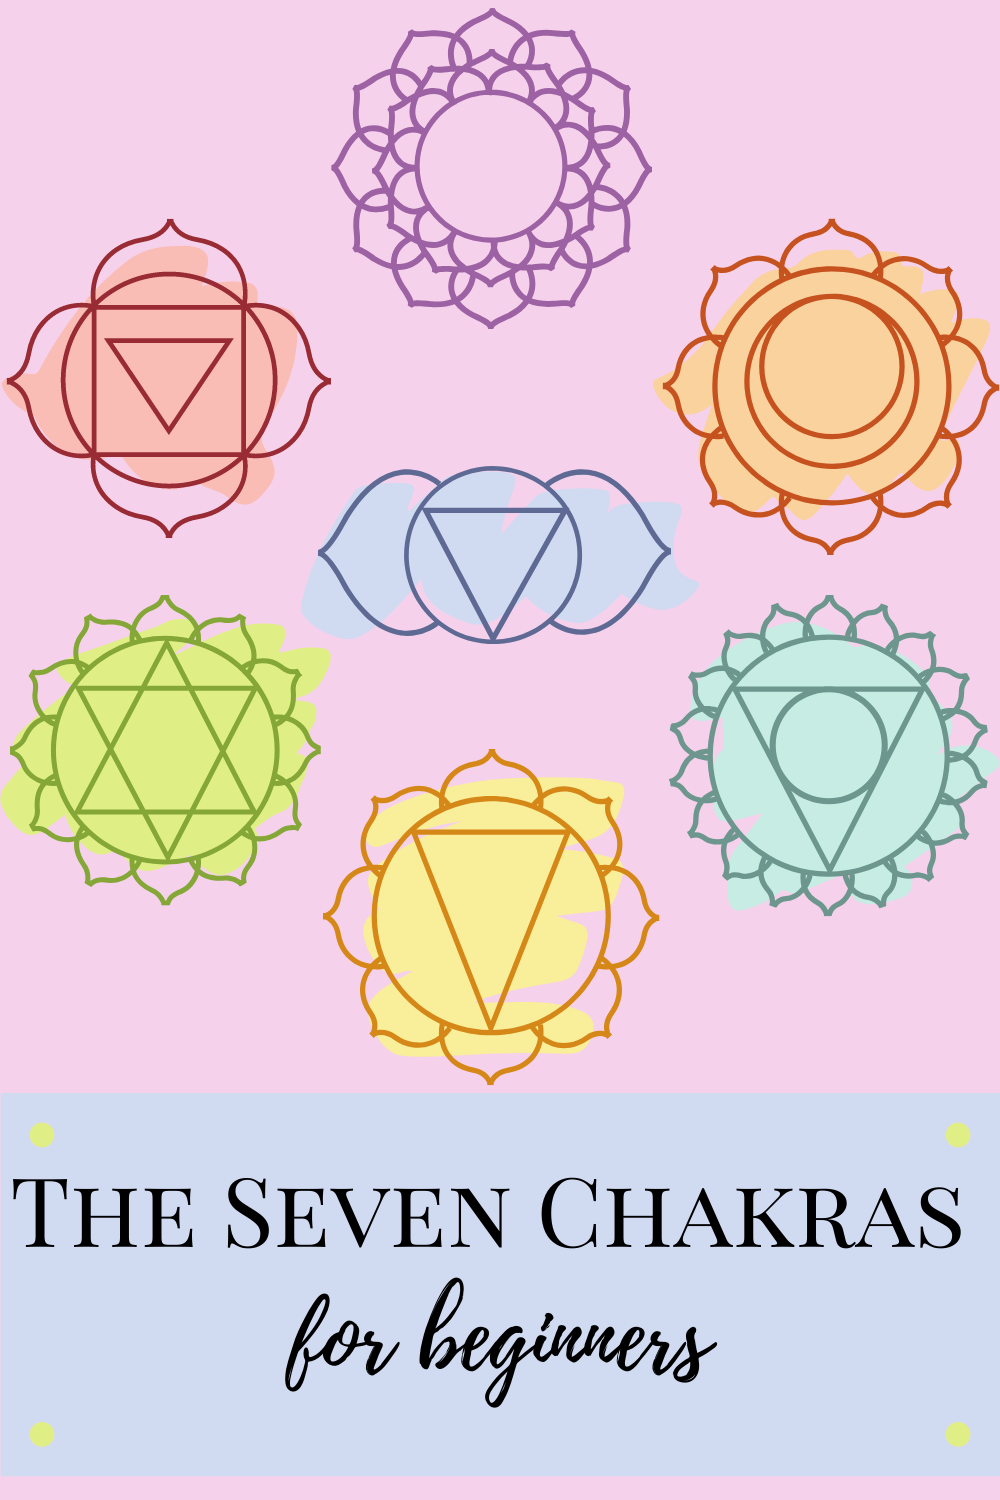 For Those New to Chakra Energy, Here Are The Basics of The Seven Chakras.